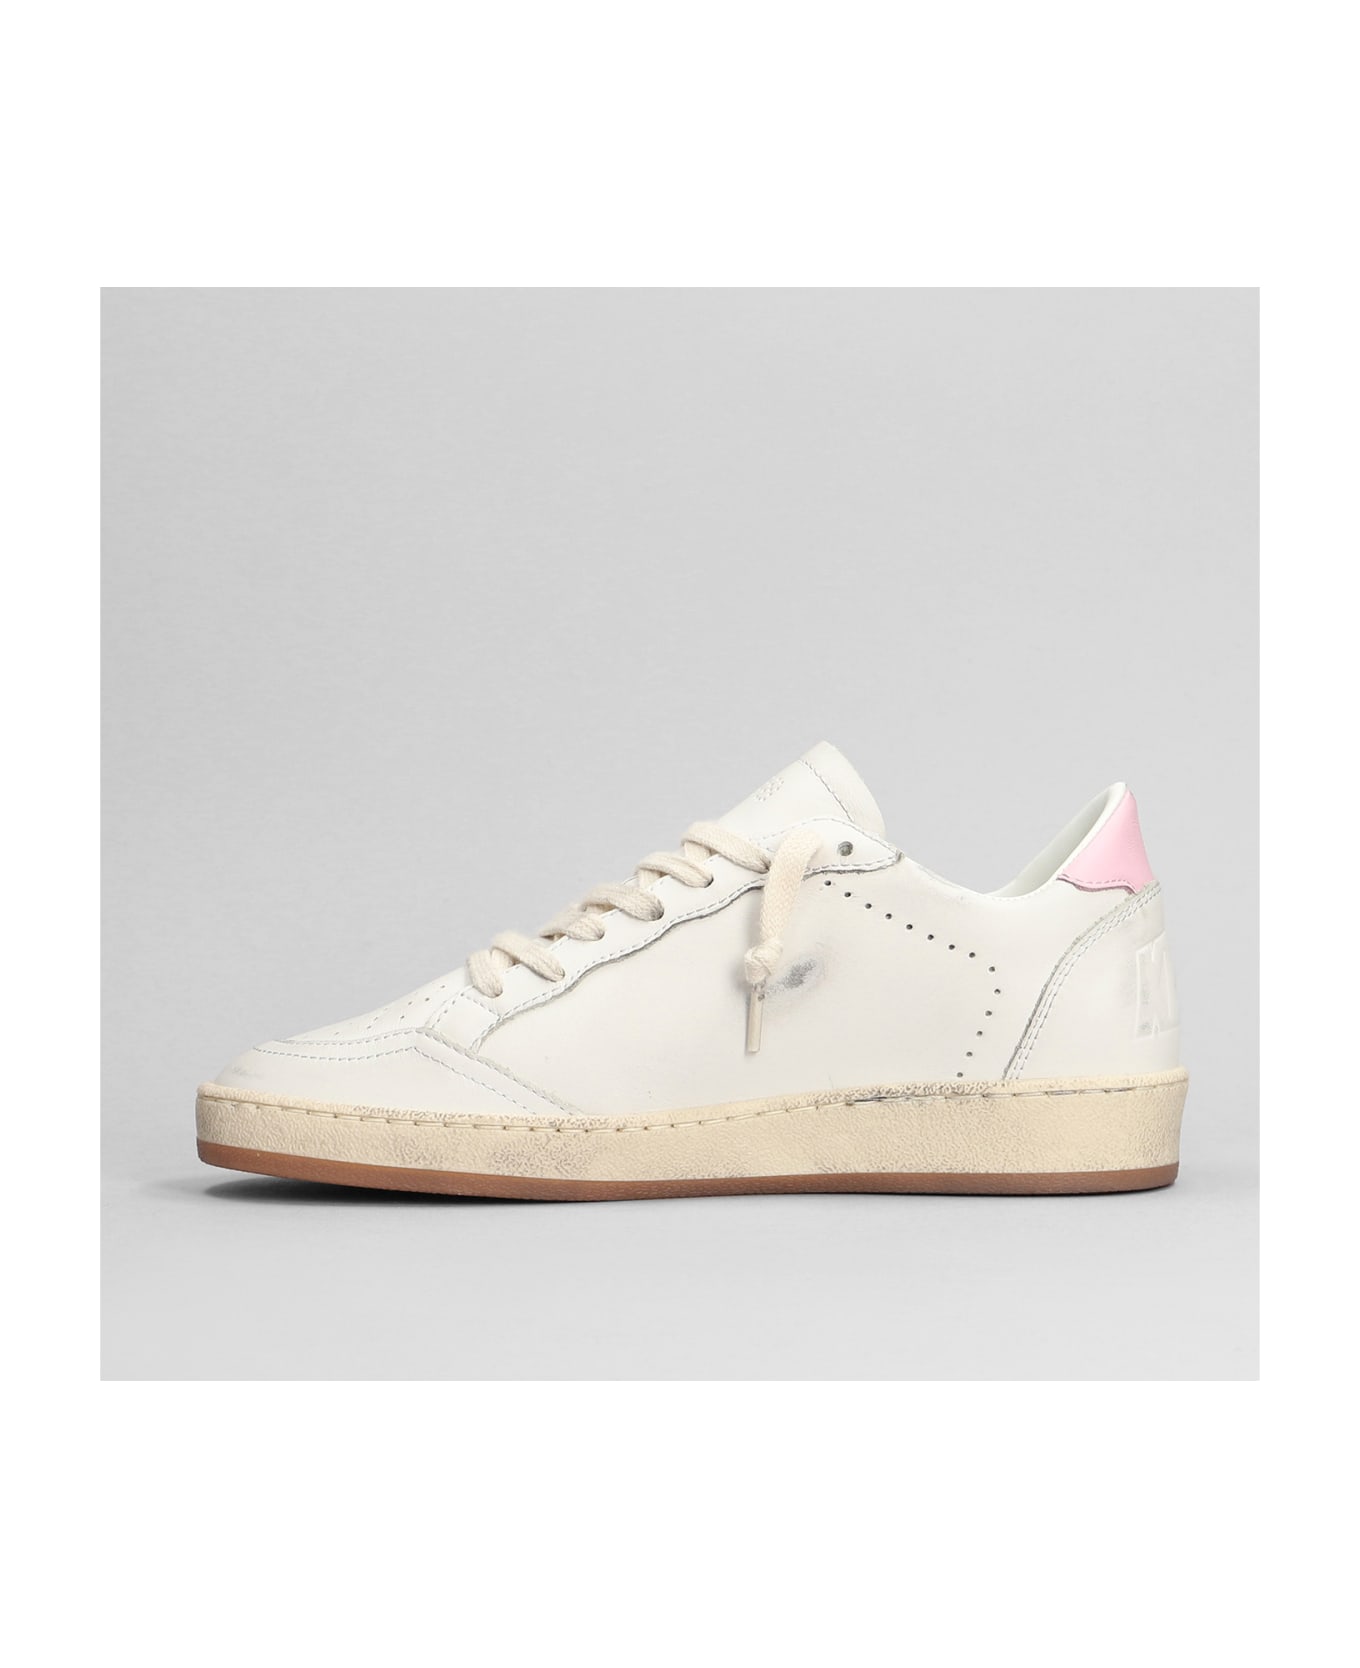 Golden Goose Ball Star Sneakers In White Leather - white